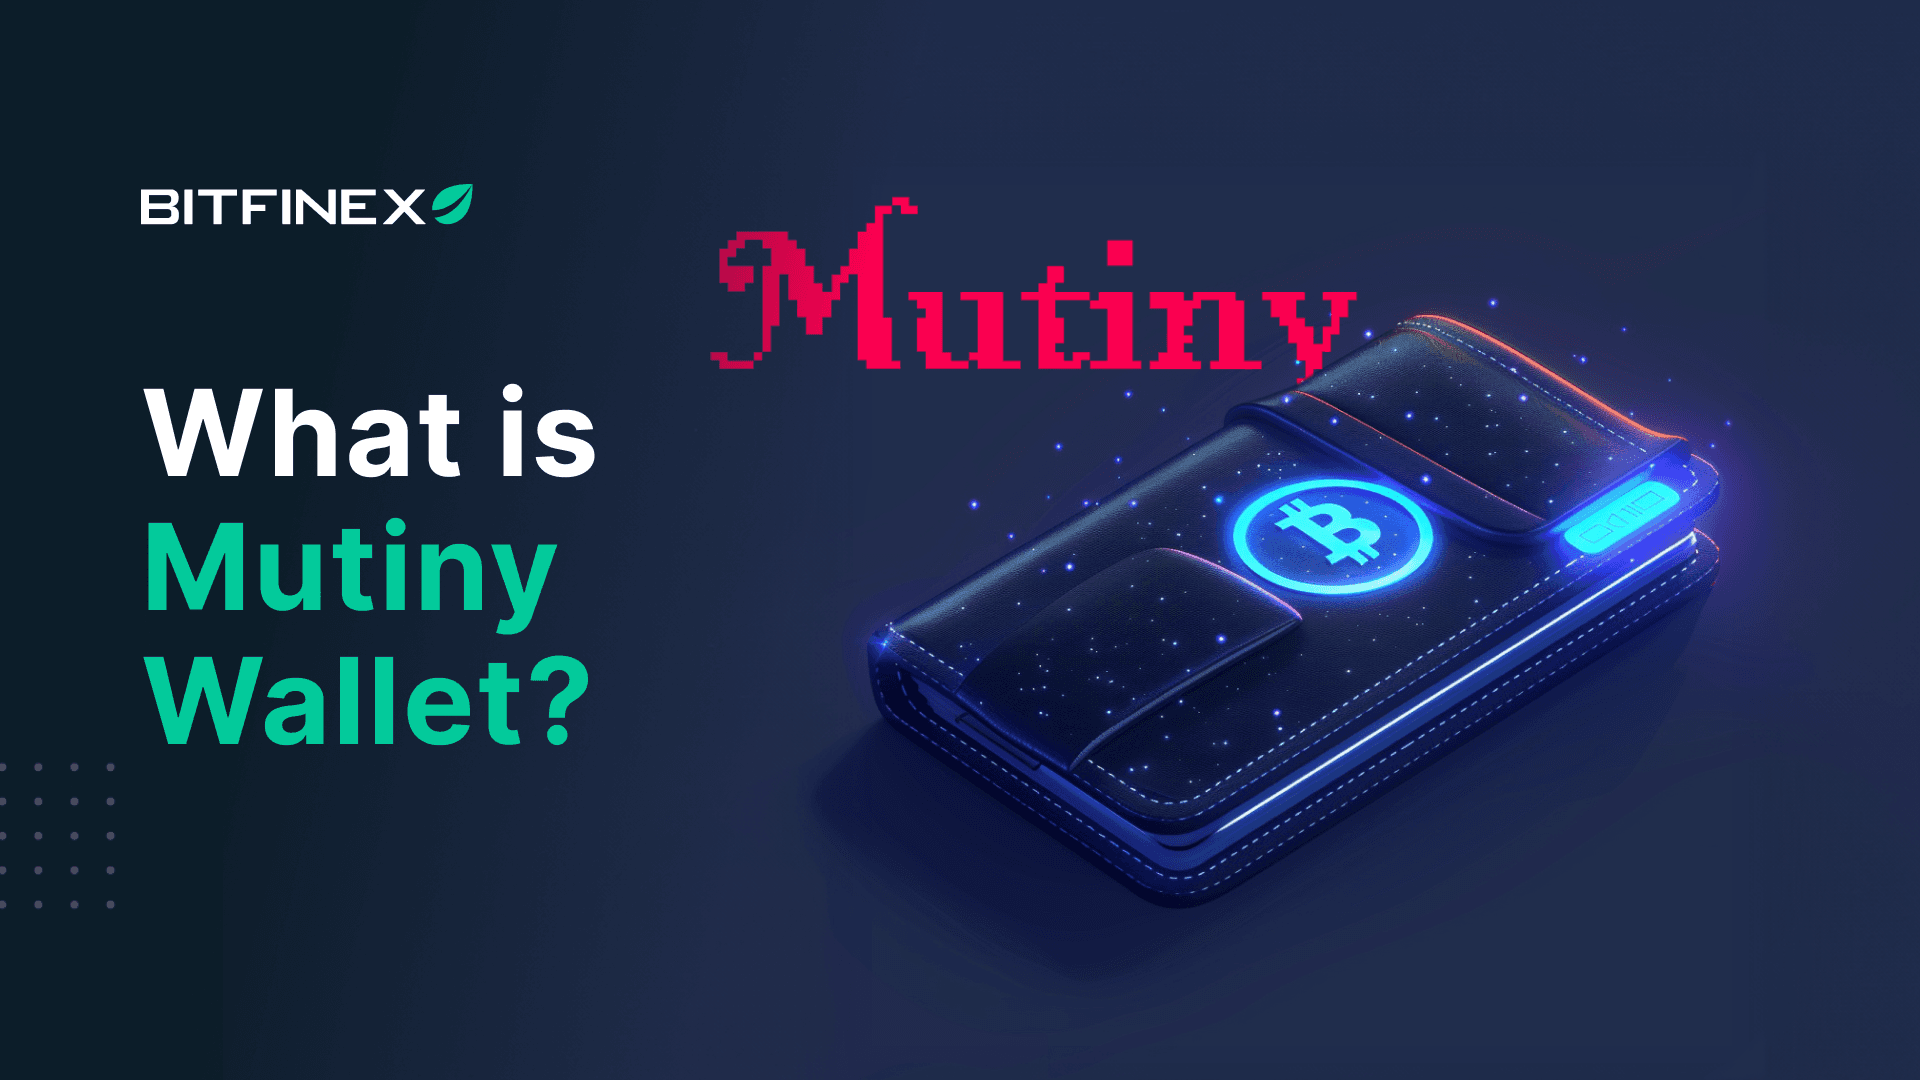 What is Mutiny Wallet?